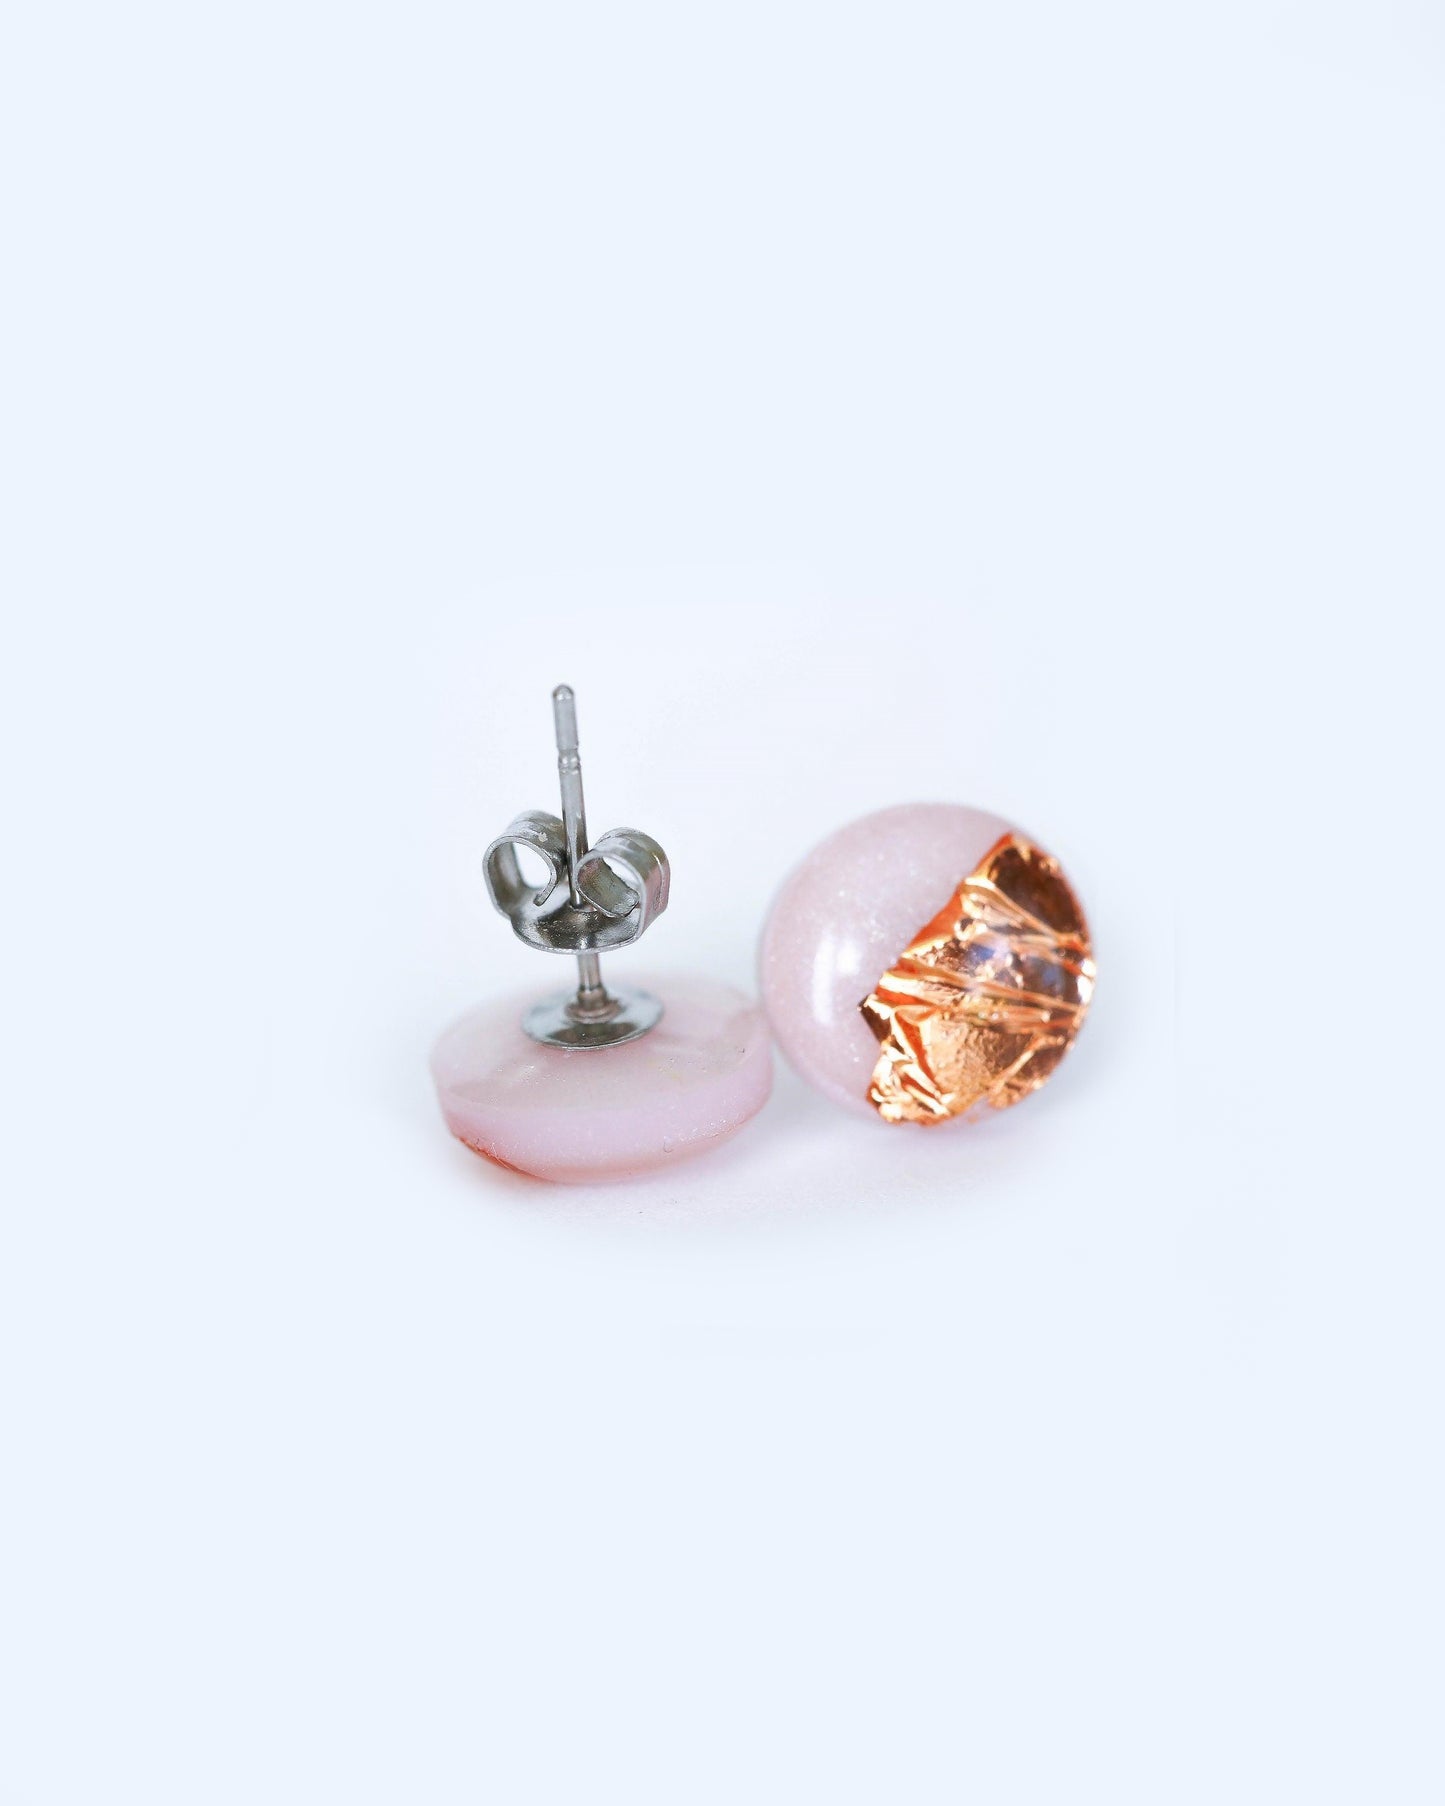 Pink rose stud earrings with gold foil